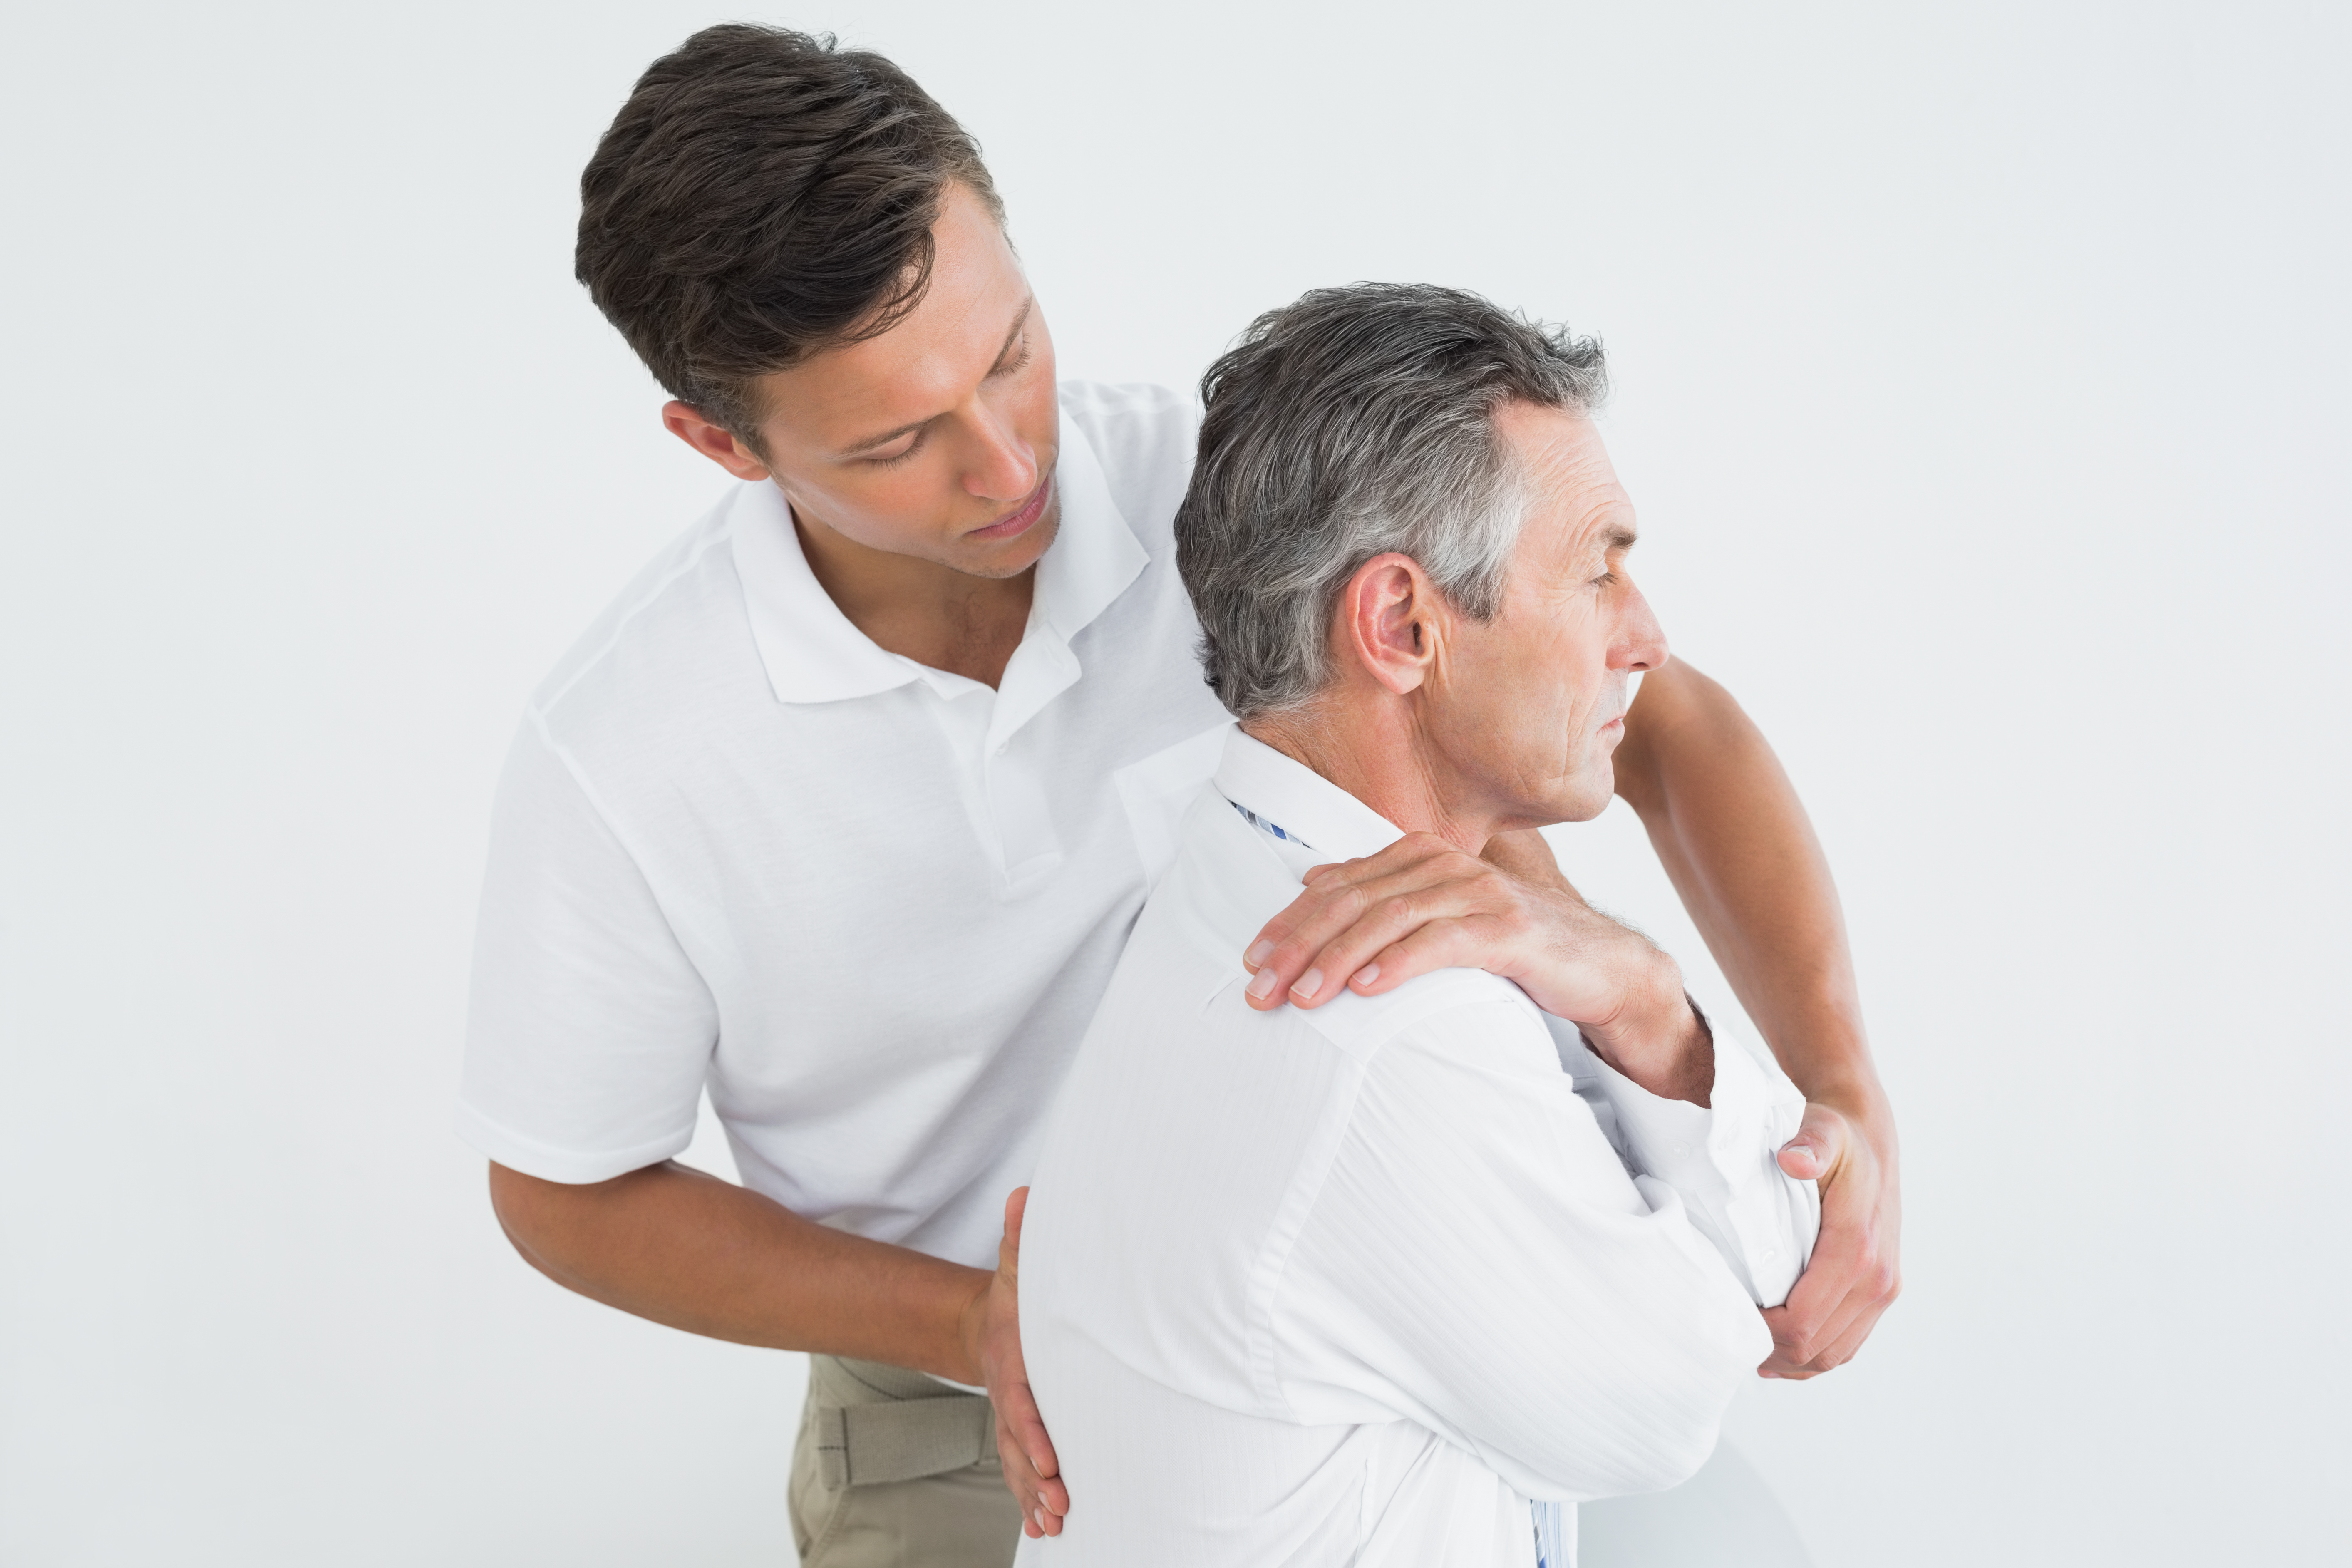 https://www.dfwback.com/wp-content/uploads/2019/01/Benefits-of-Physical-Therapy-for-Back-Pain.jpg